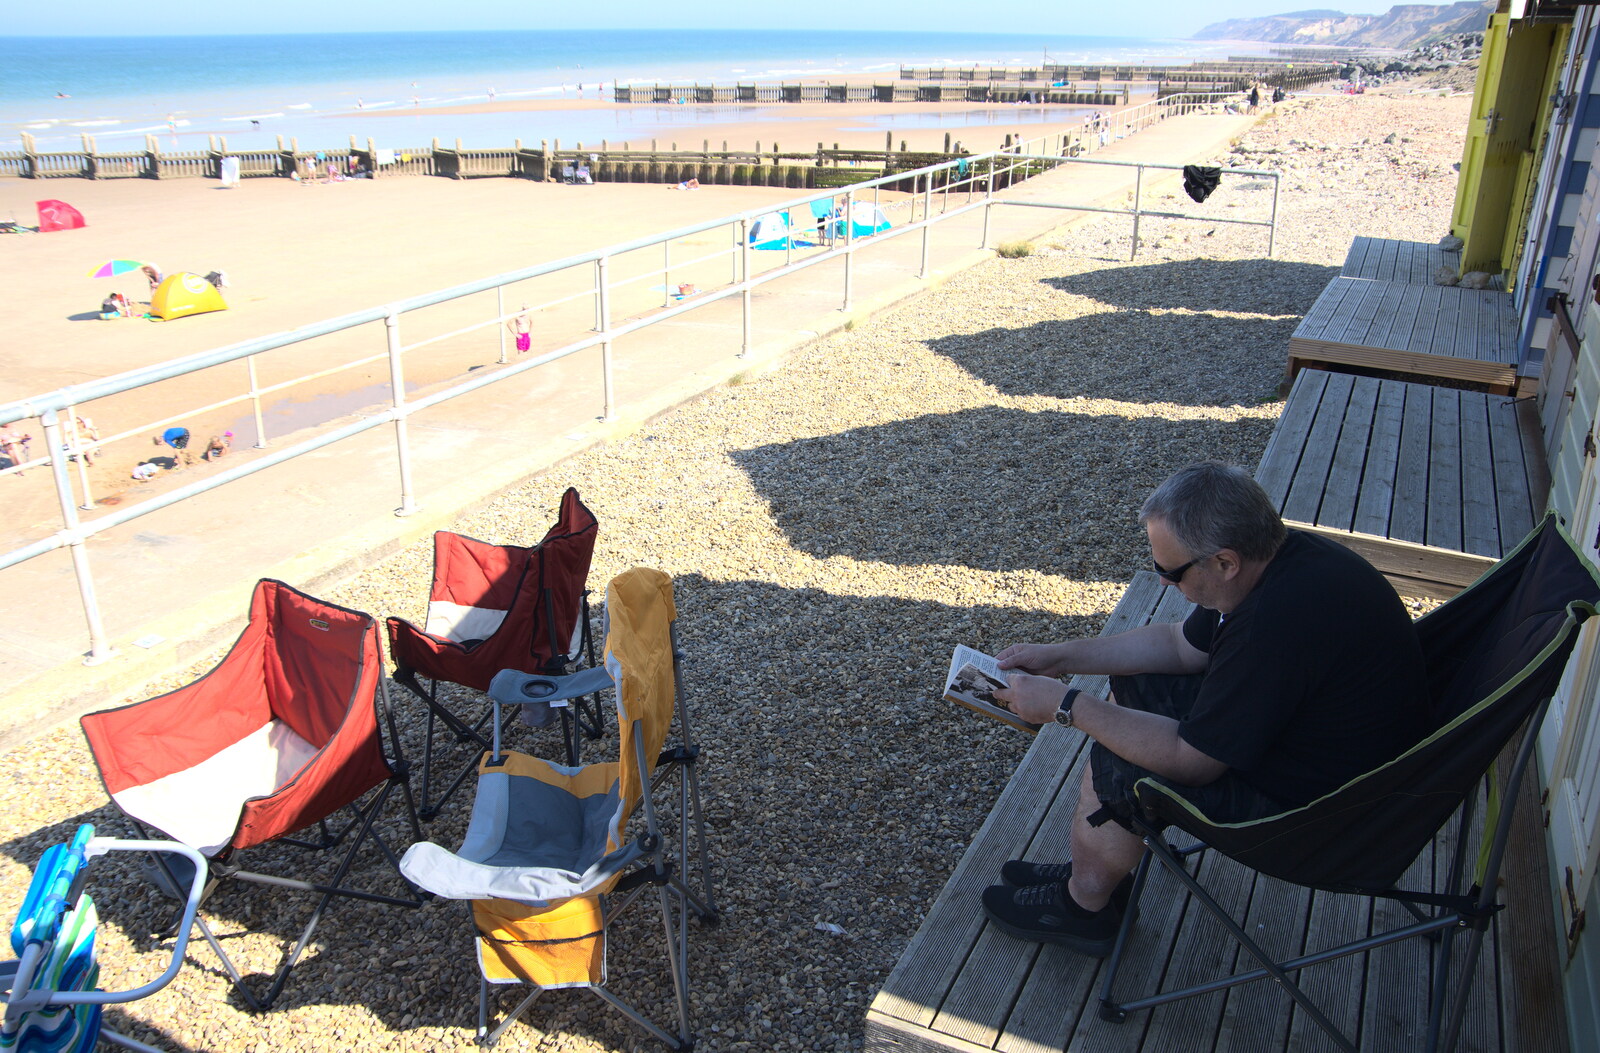 Chris reads a book from Camping at Forest Park, Cromer, Norfolk - 12th August 2022